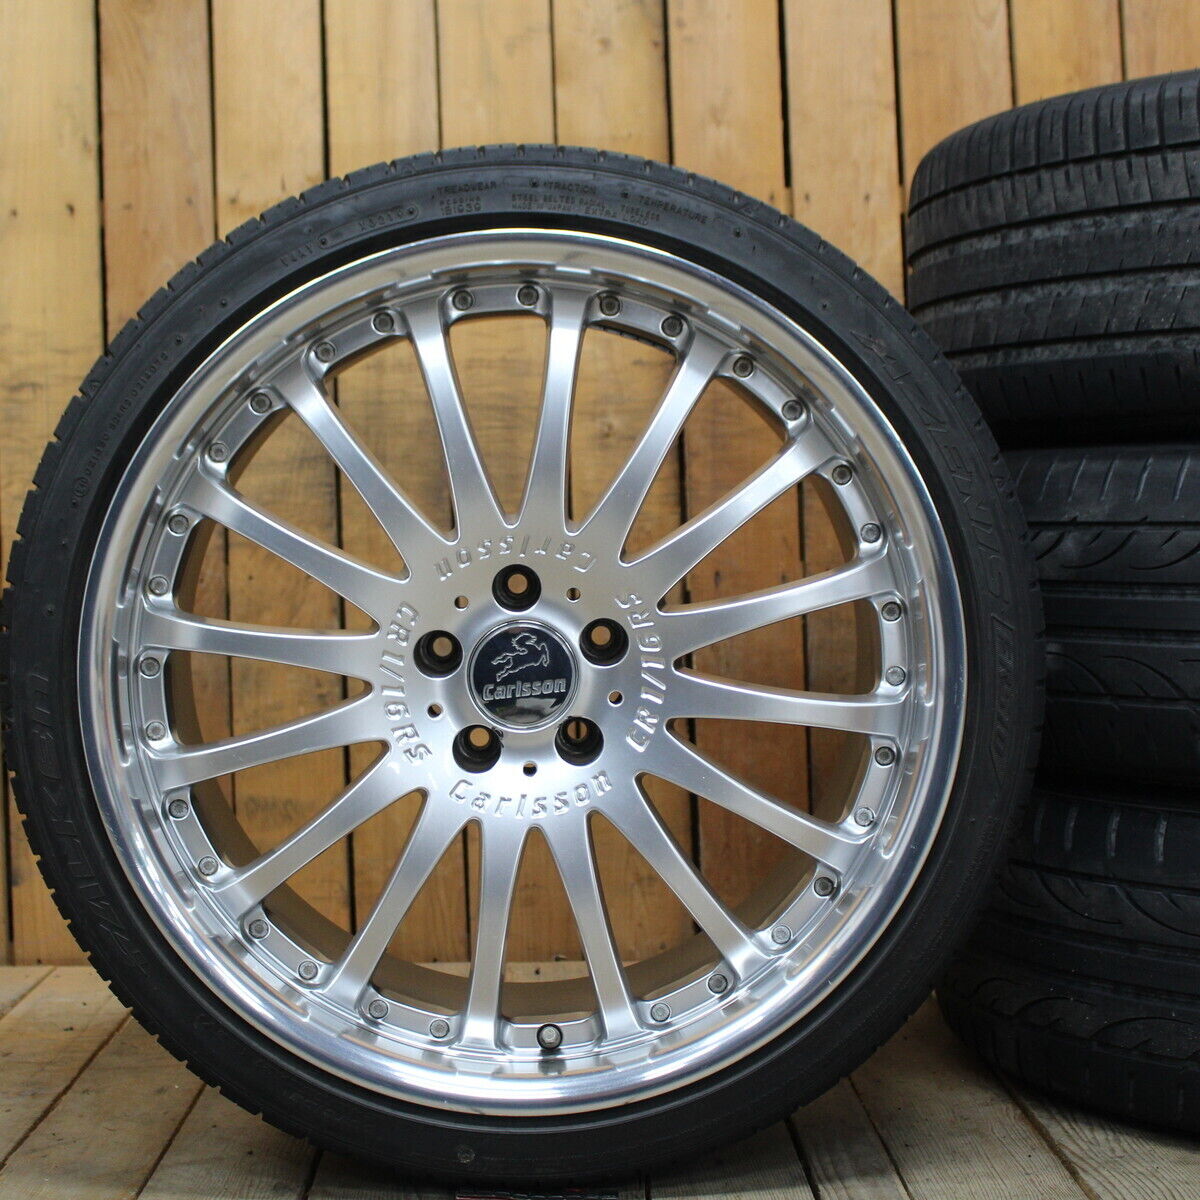 JDM Alphard Vellfire Fuga Crown and others 21 inch carlsson carlson 1/ No Tires